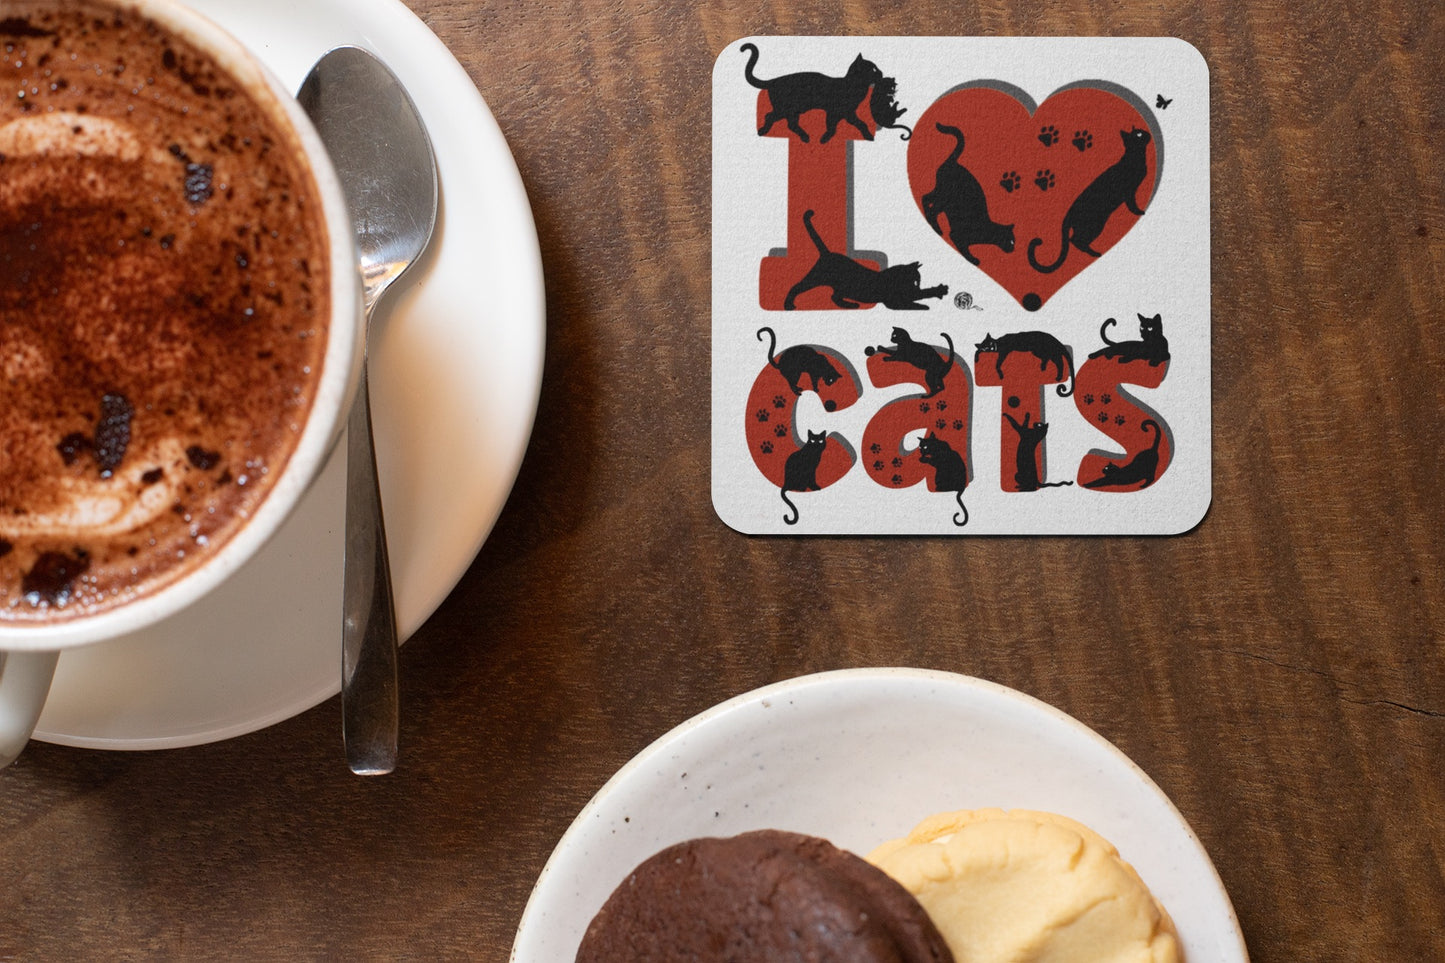 I Love Cats Silhouette Collection Art Square Personalised Coaster Gift Idea